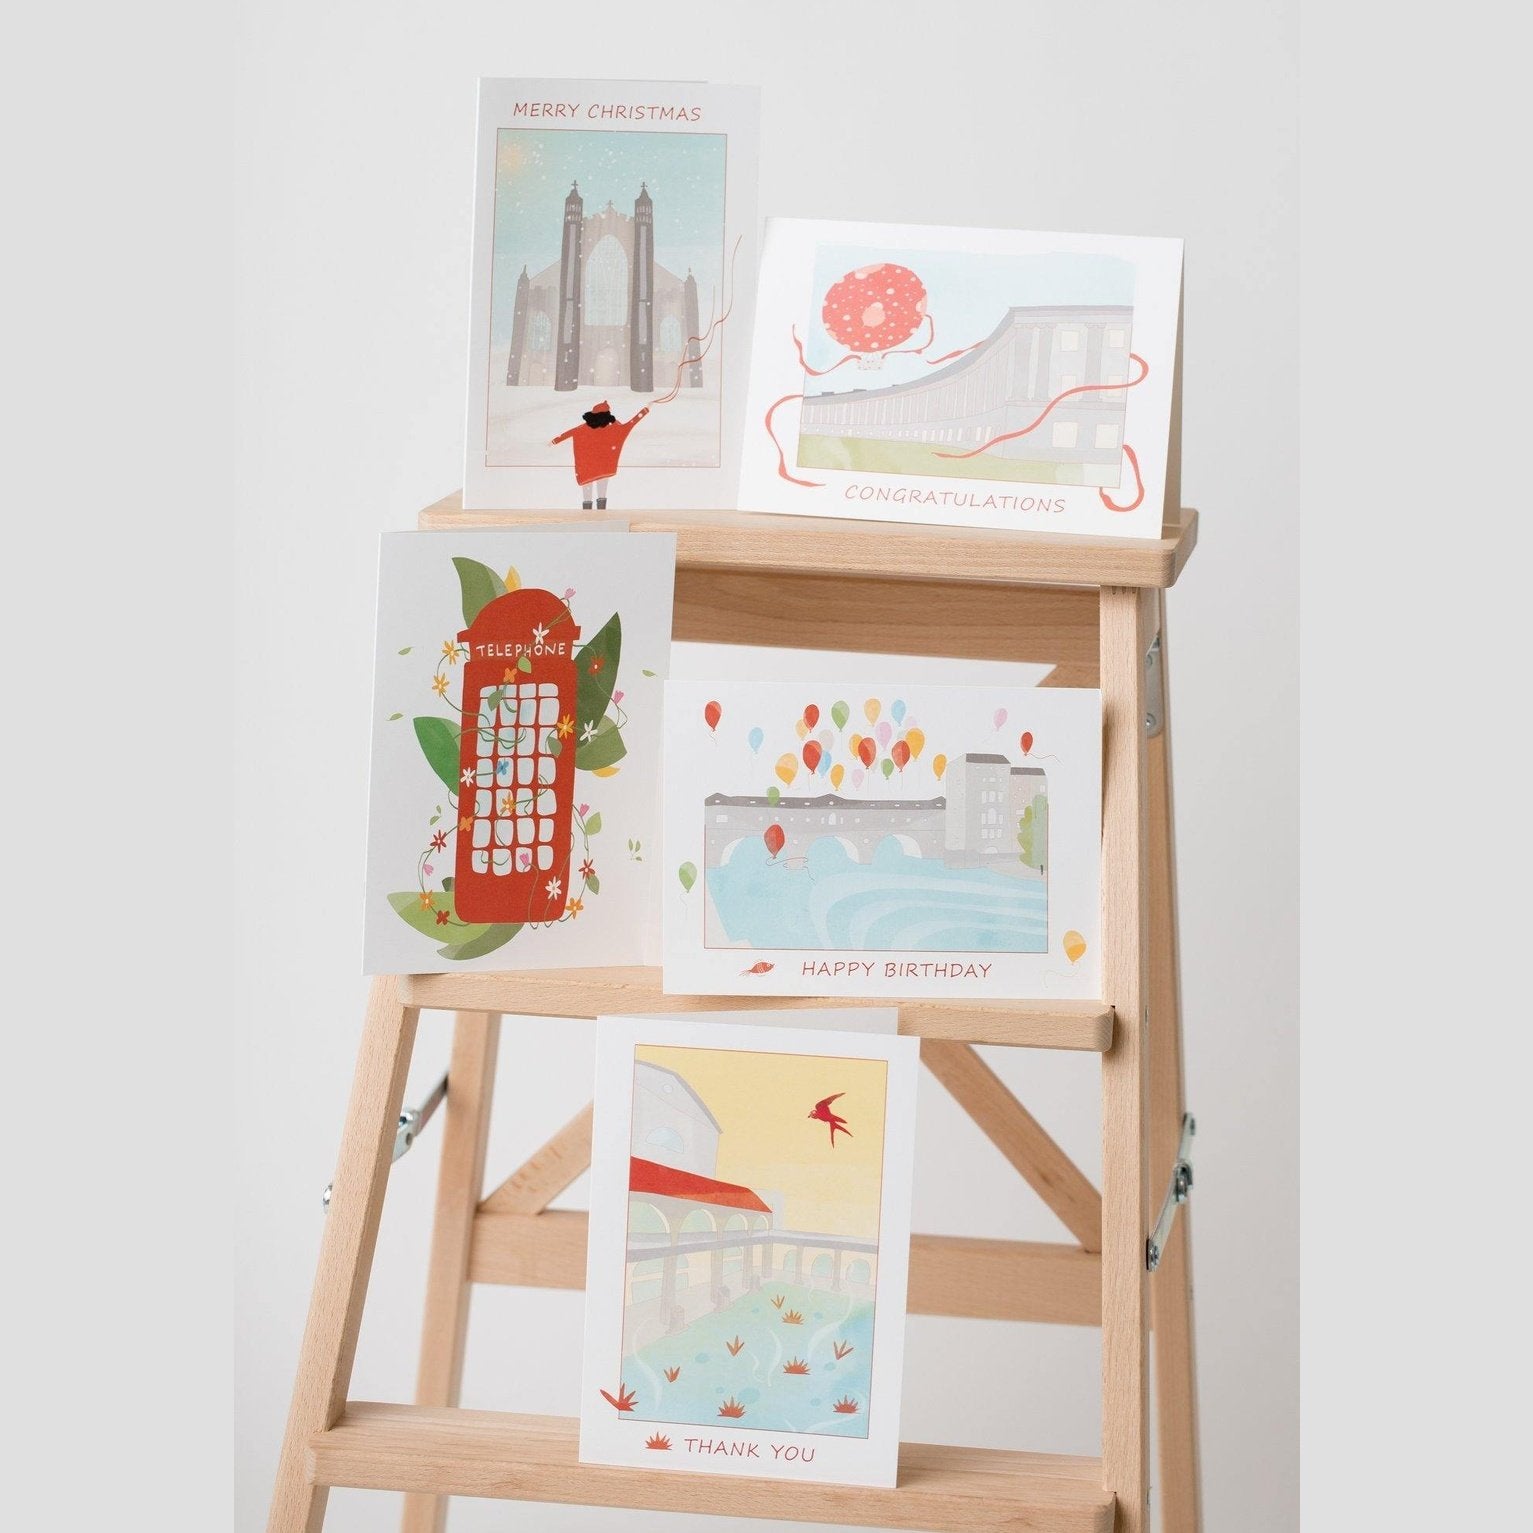 Greeting Cards - TilianKids